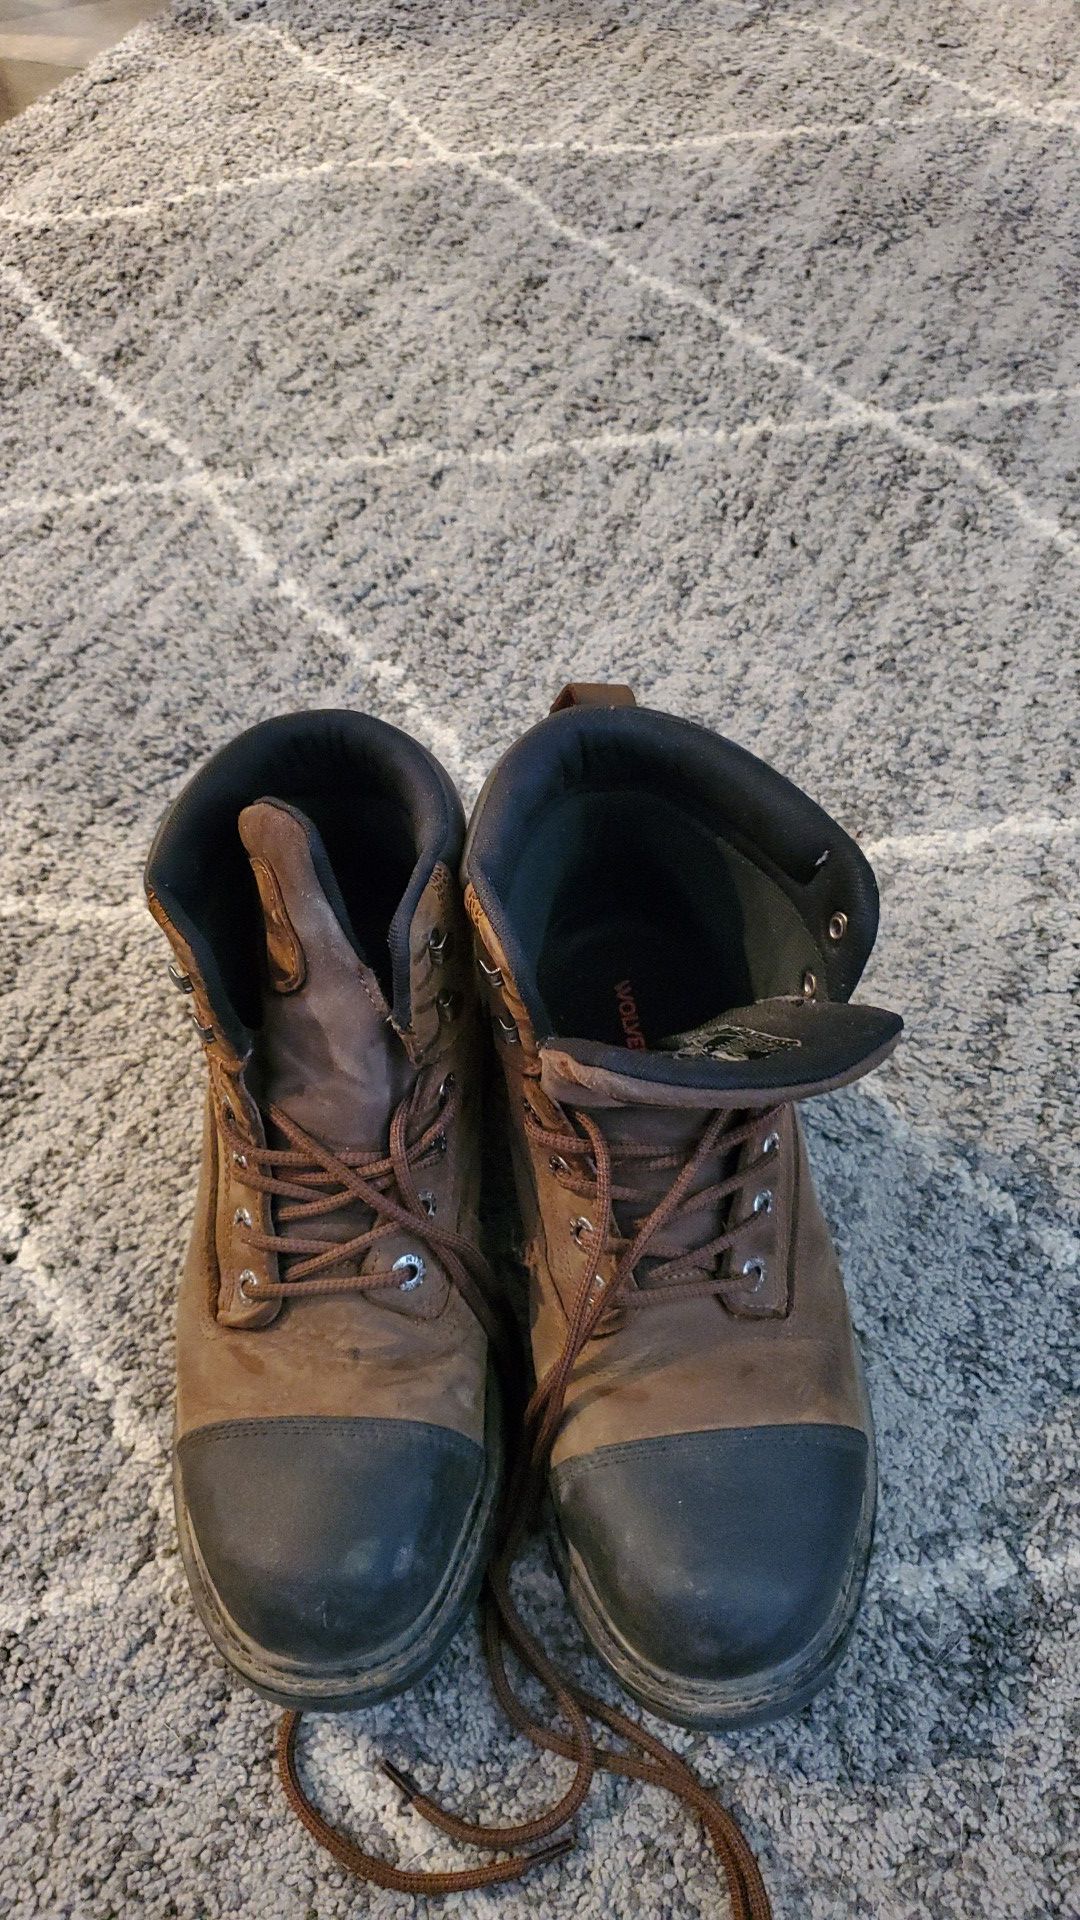 Men's 9.5 work boots . Used for 3 days as back ups